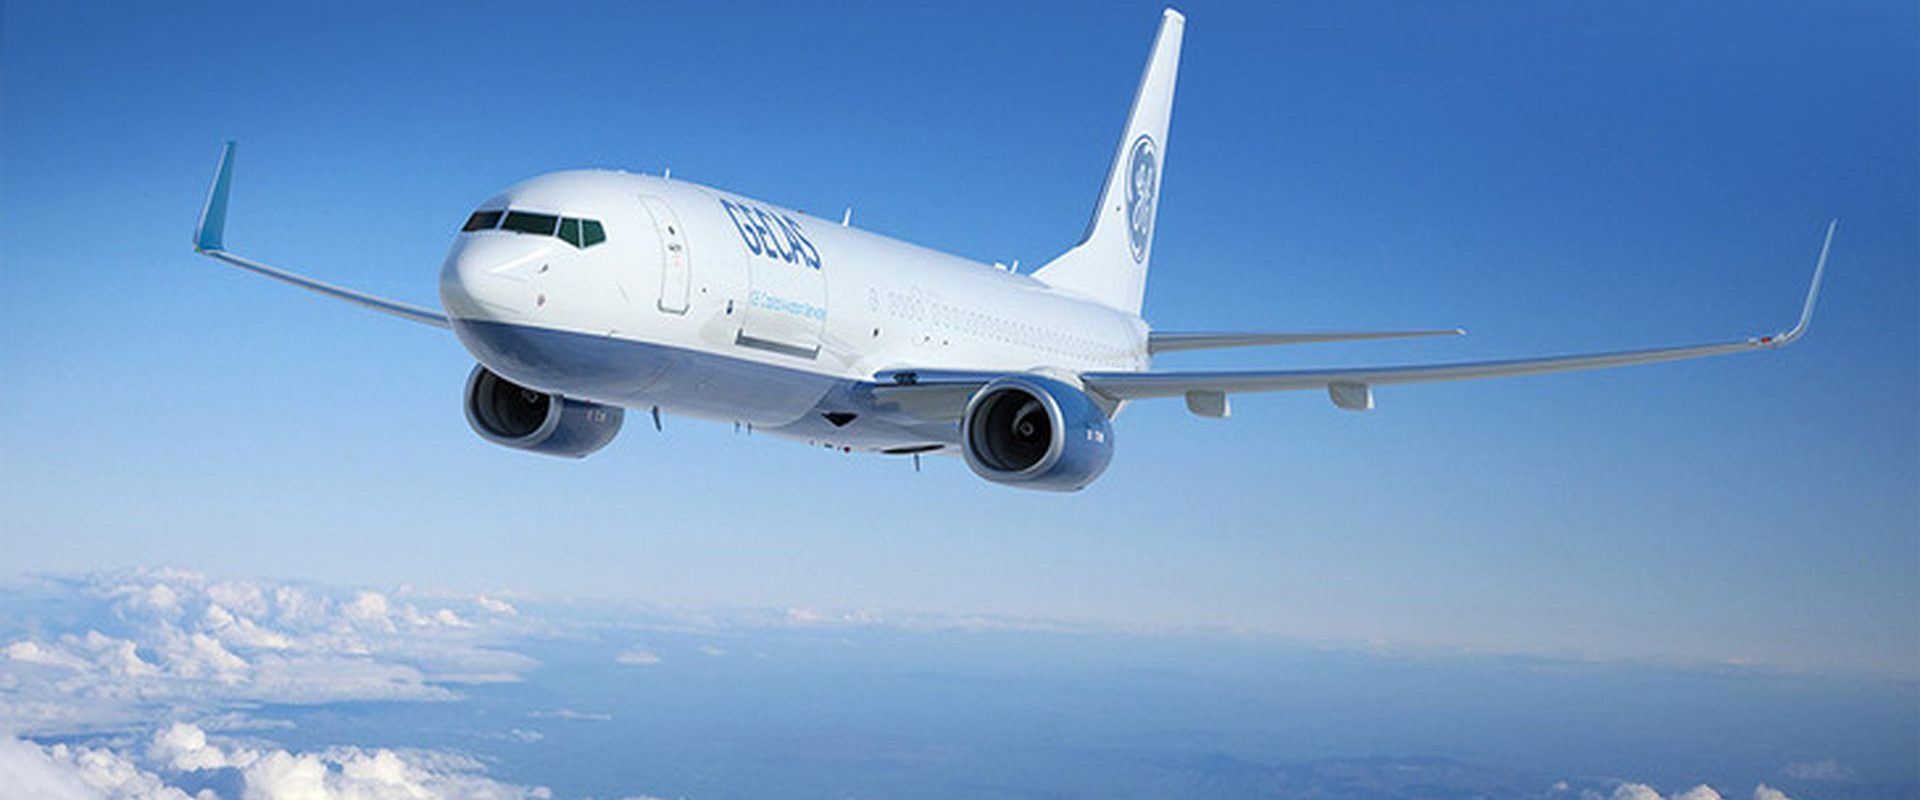 Boeing will increase production capacities of converted freighter aircrafts 737-800BCF in China